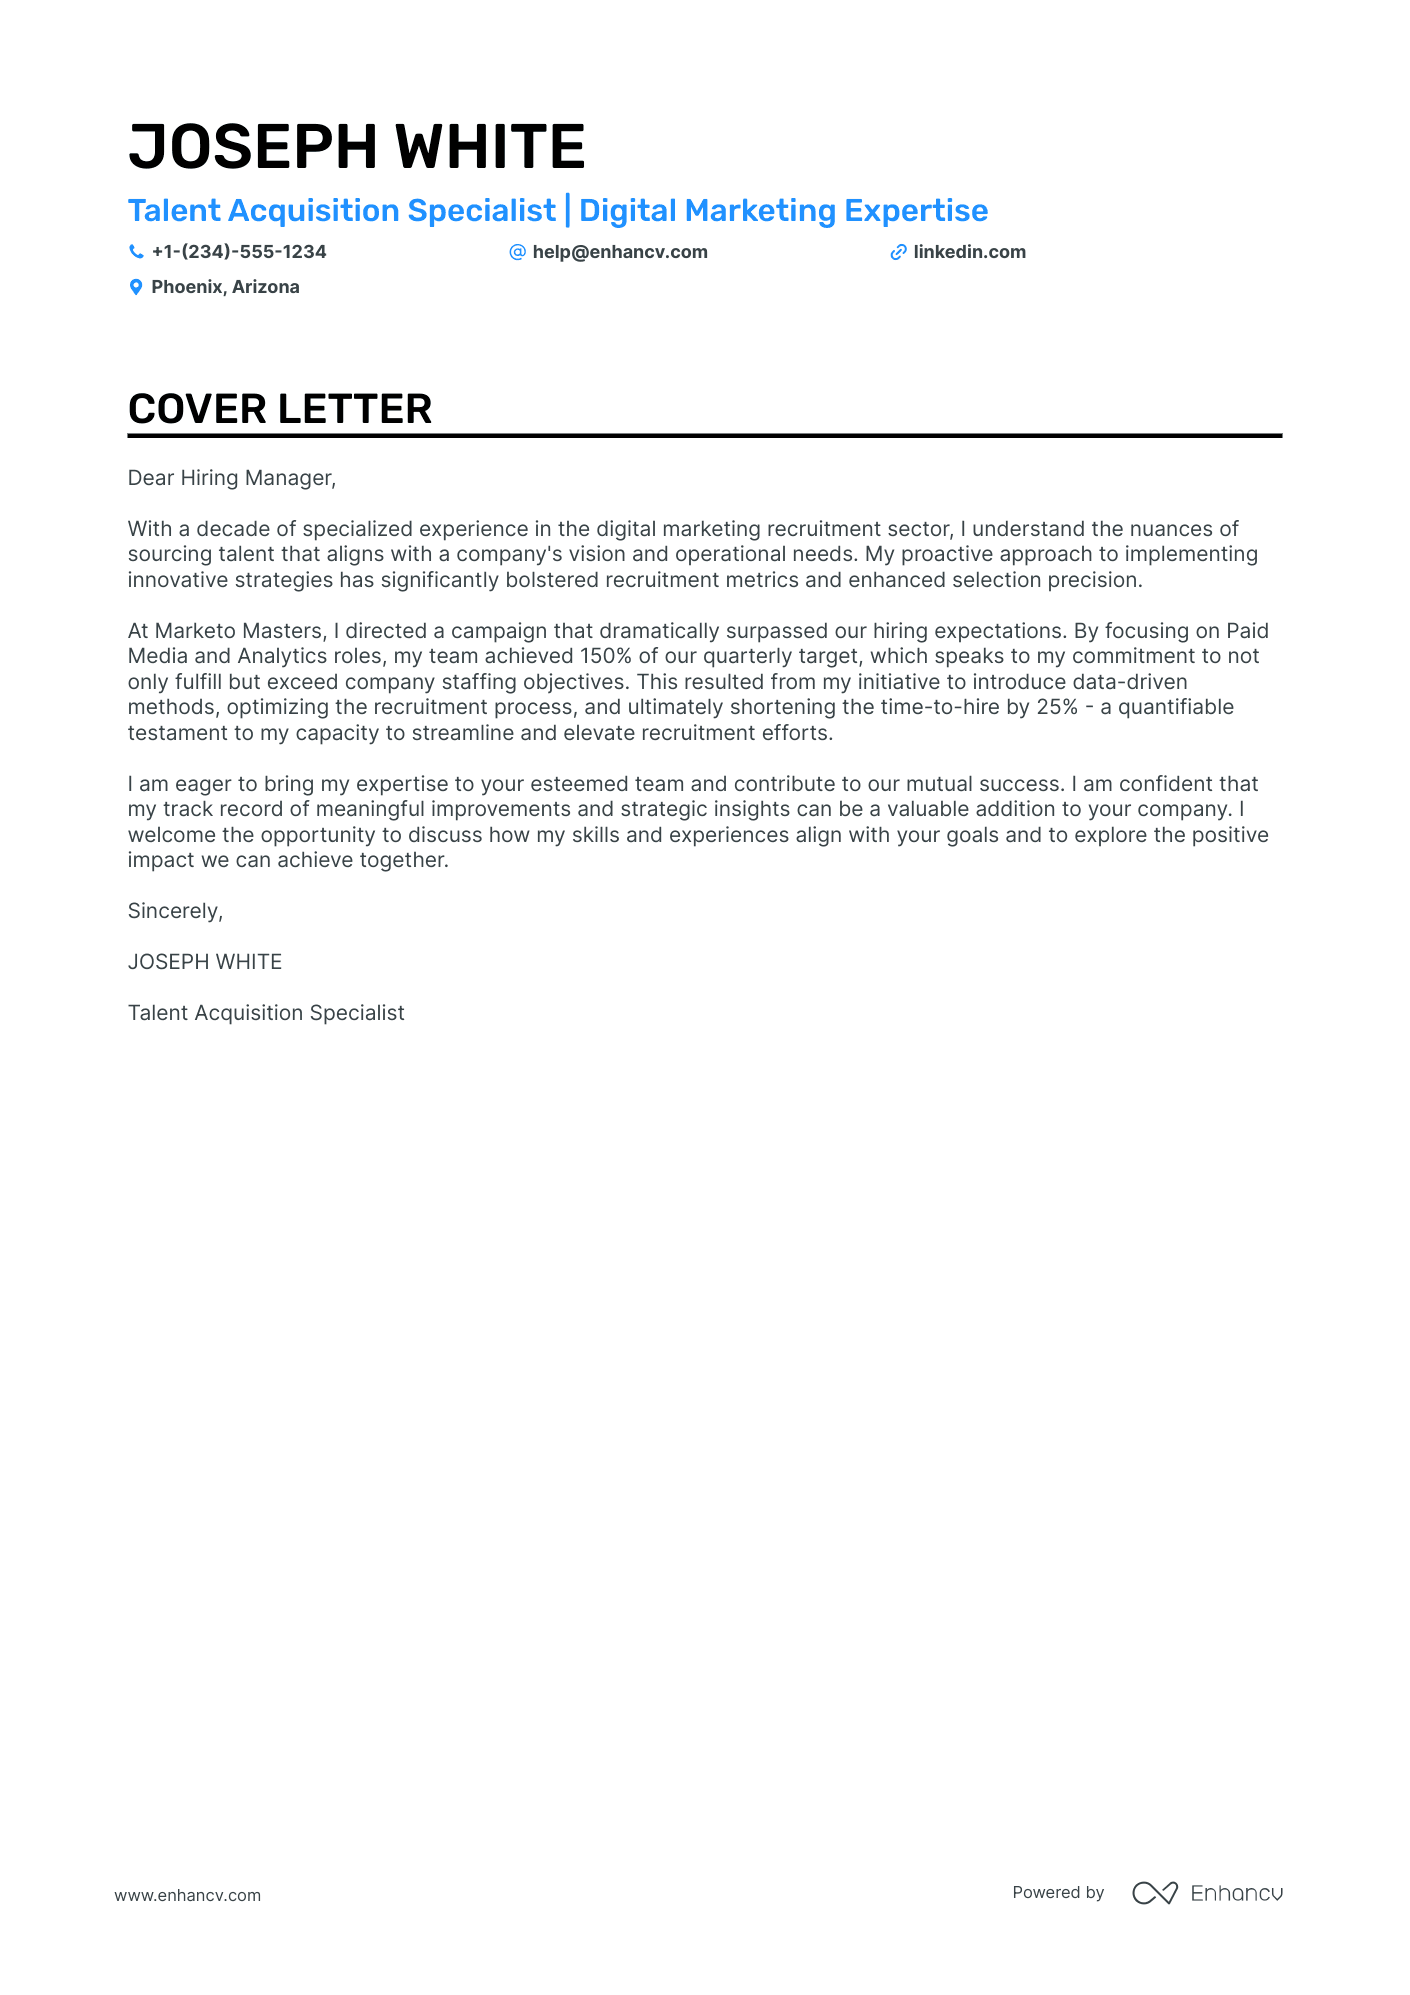 Talent Acquisition Manager cover letter